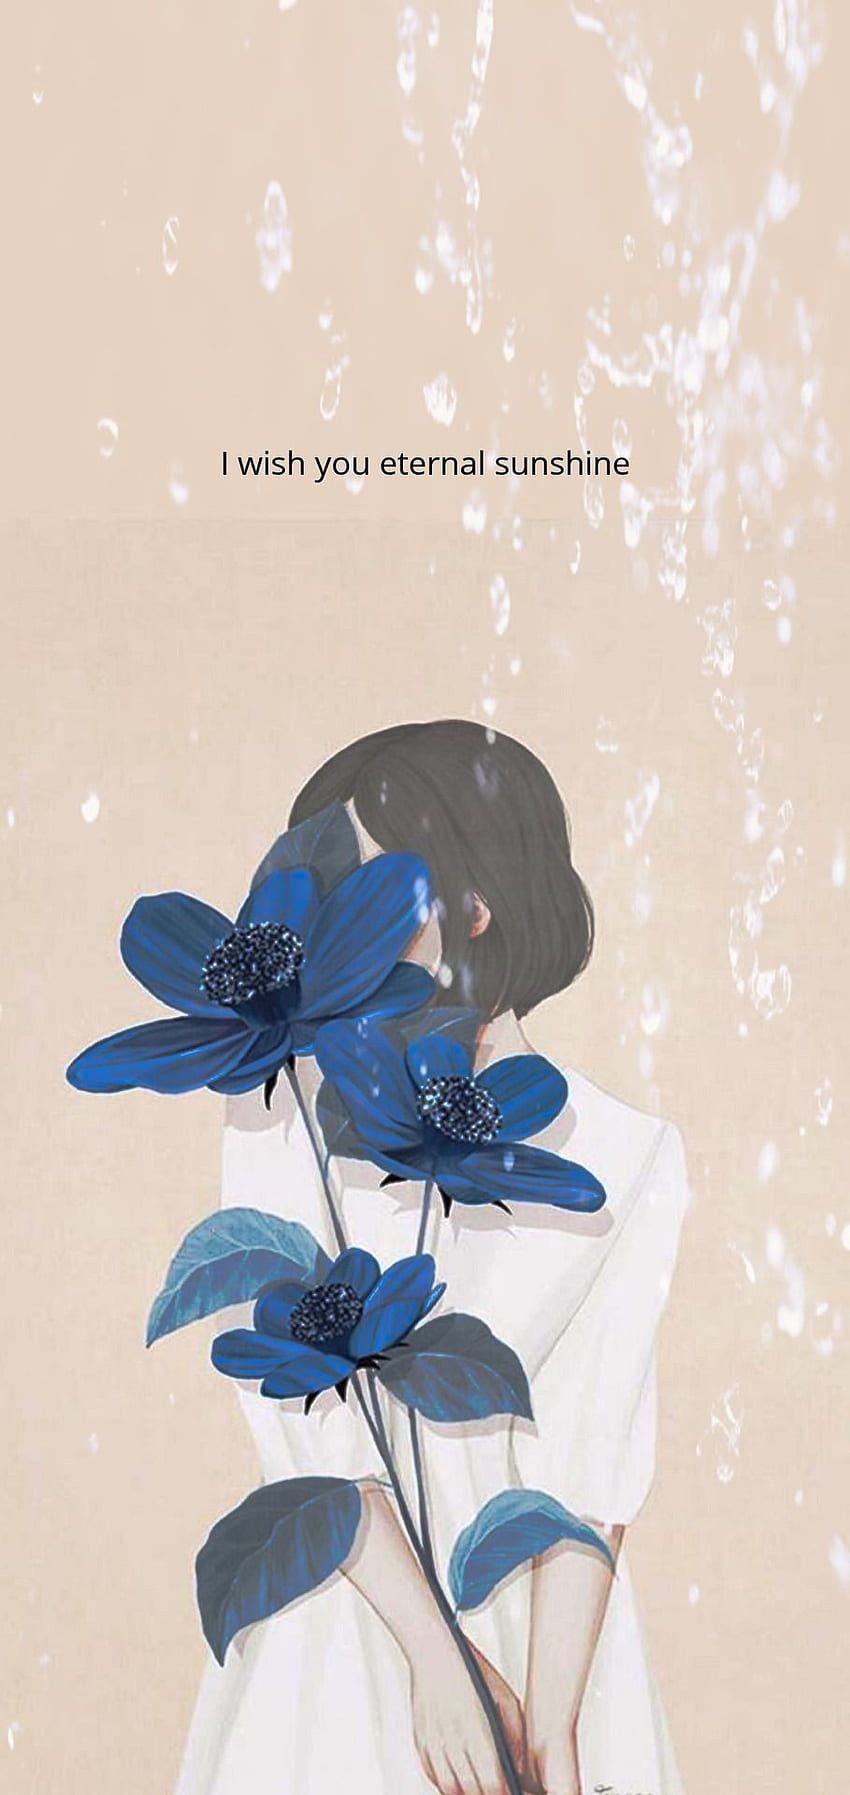 Aesthetic phone wallpaper of a girl holding blue flowers with a quote that says 